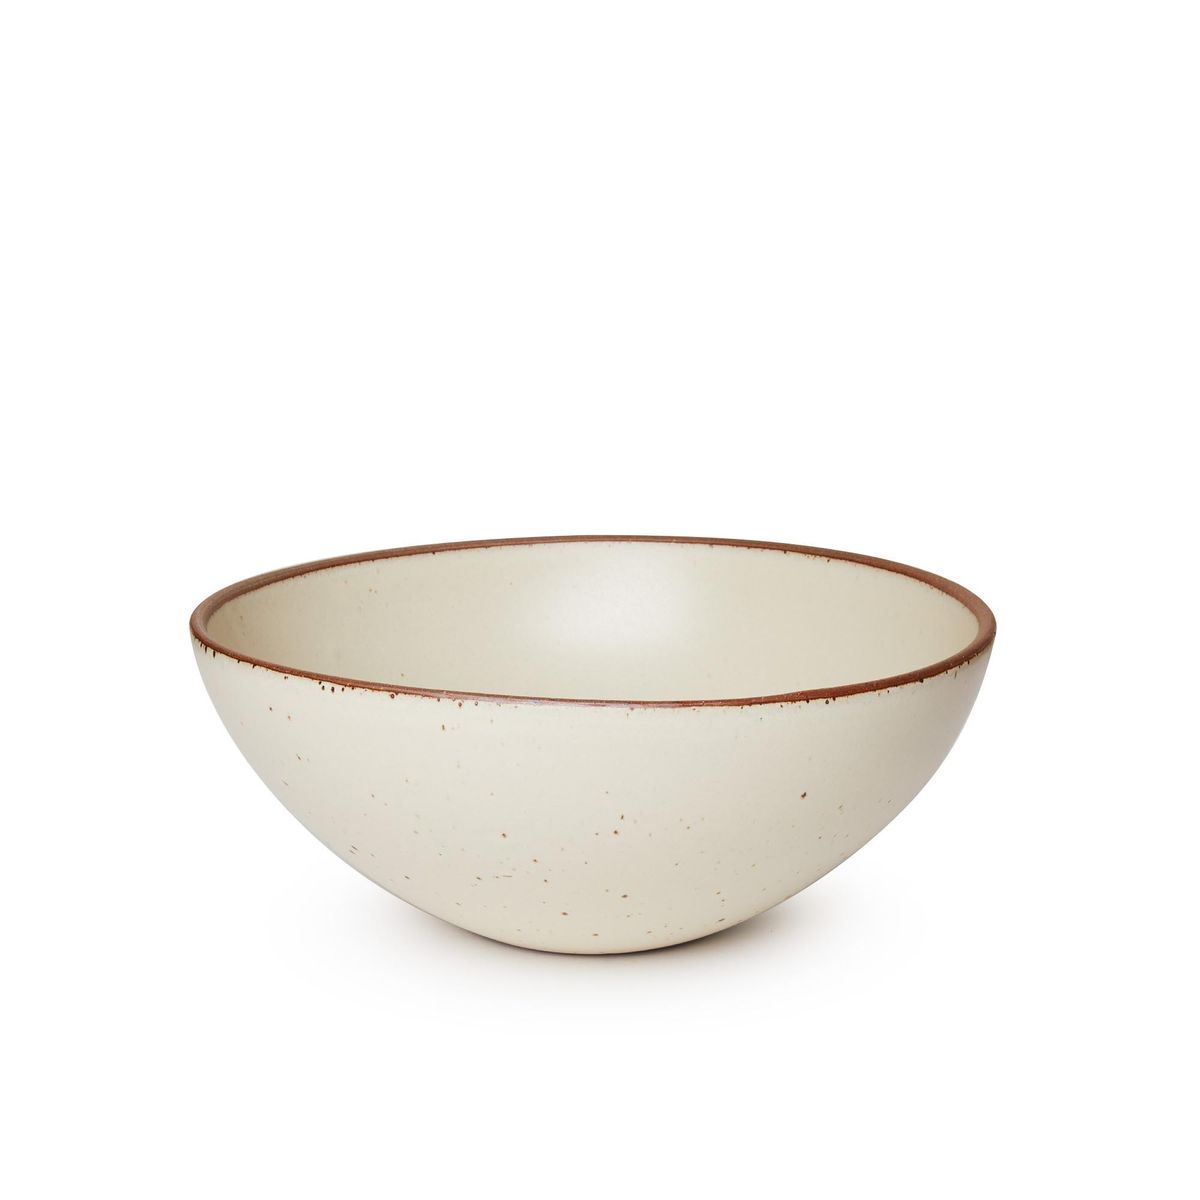 A large rounded ceramic bowl in a warm, tan-toned, off-white color featuring iron speckles and an unglazed rim